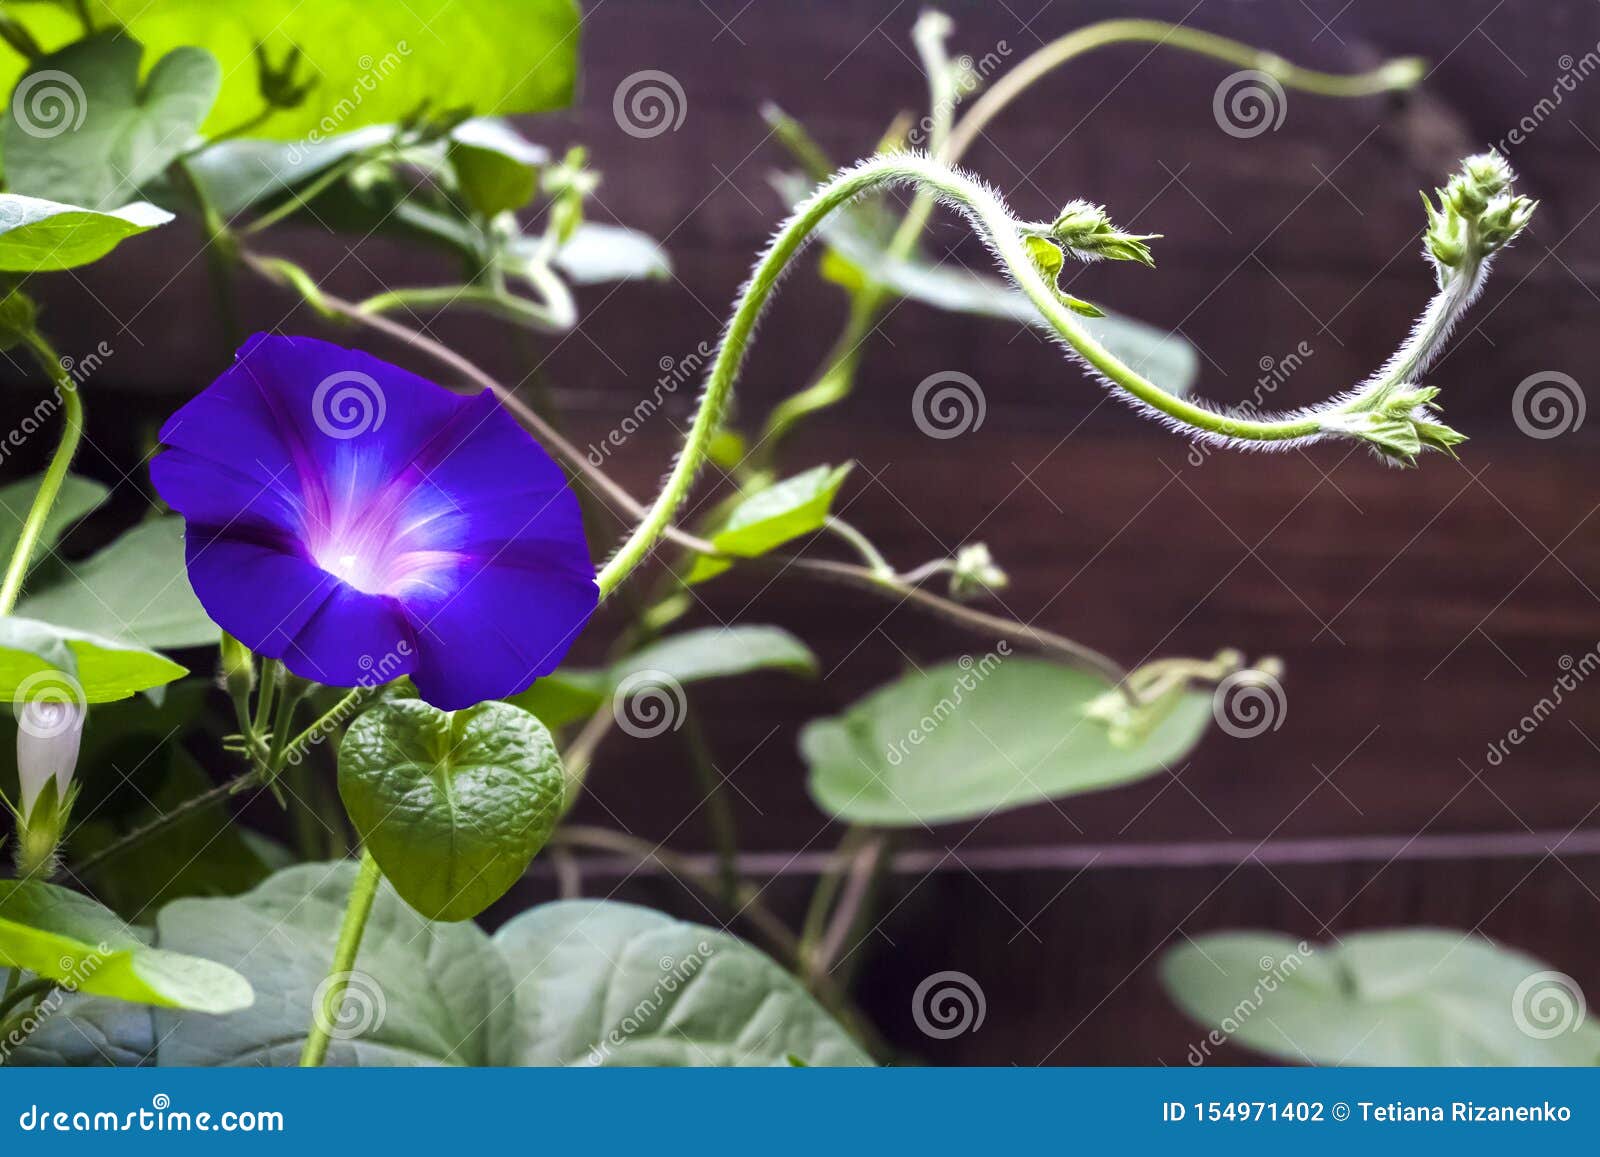 Blue Morning Glory Ipomoea Flower Climbing Along The Wooden Fence Stock Photo Image Of Climbing Bloom 154971402